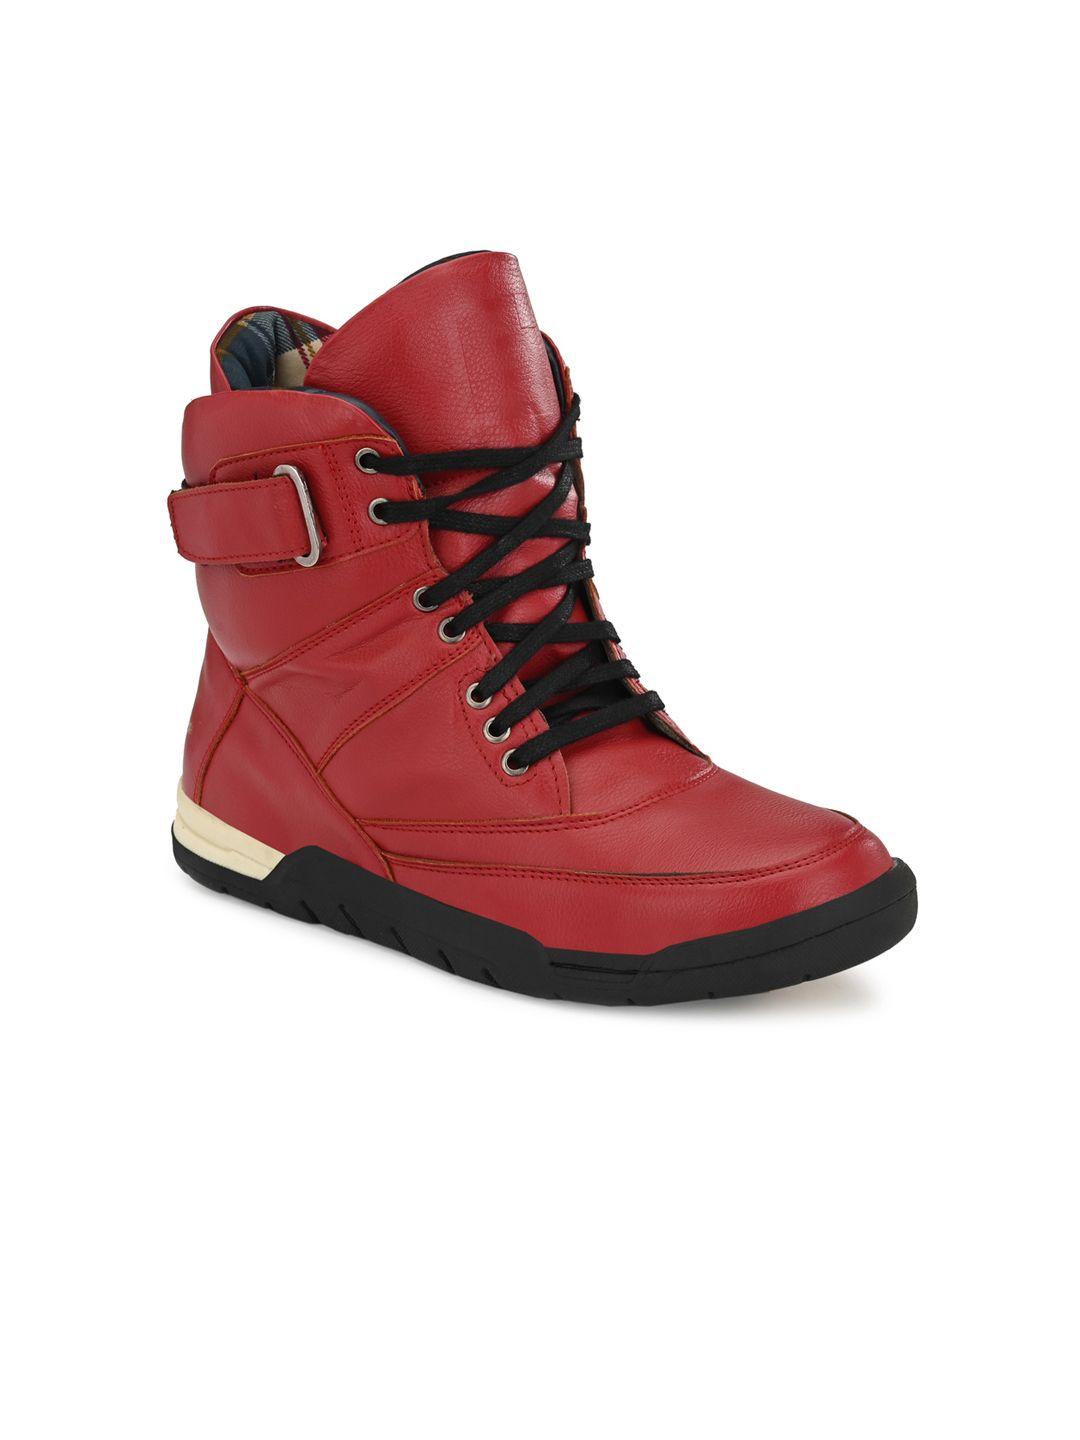 eego italy men high top ankle boots